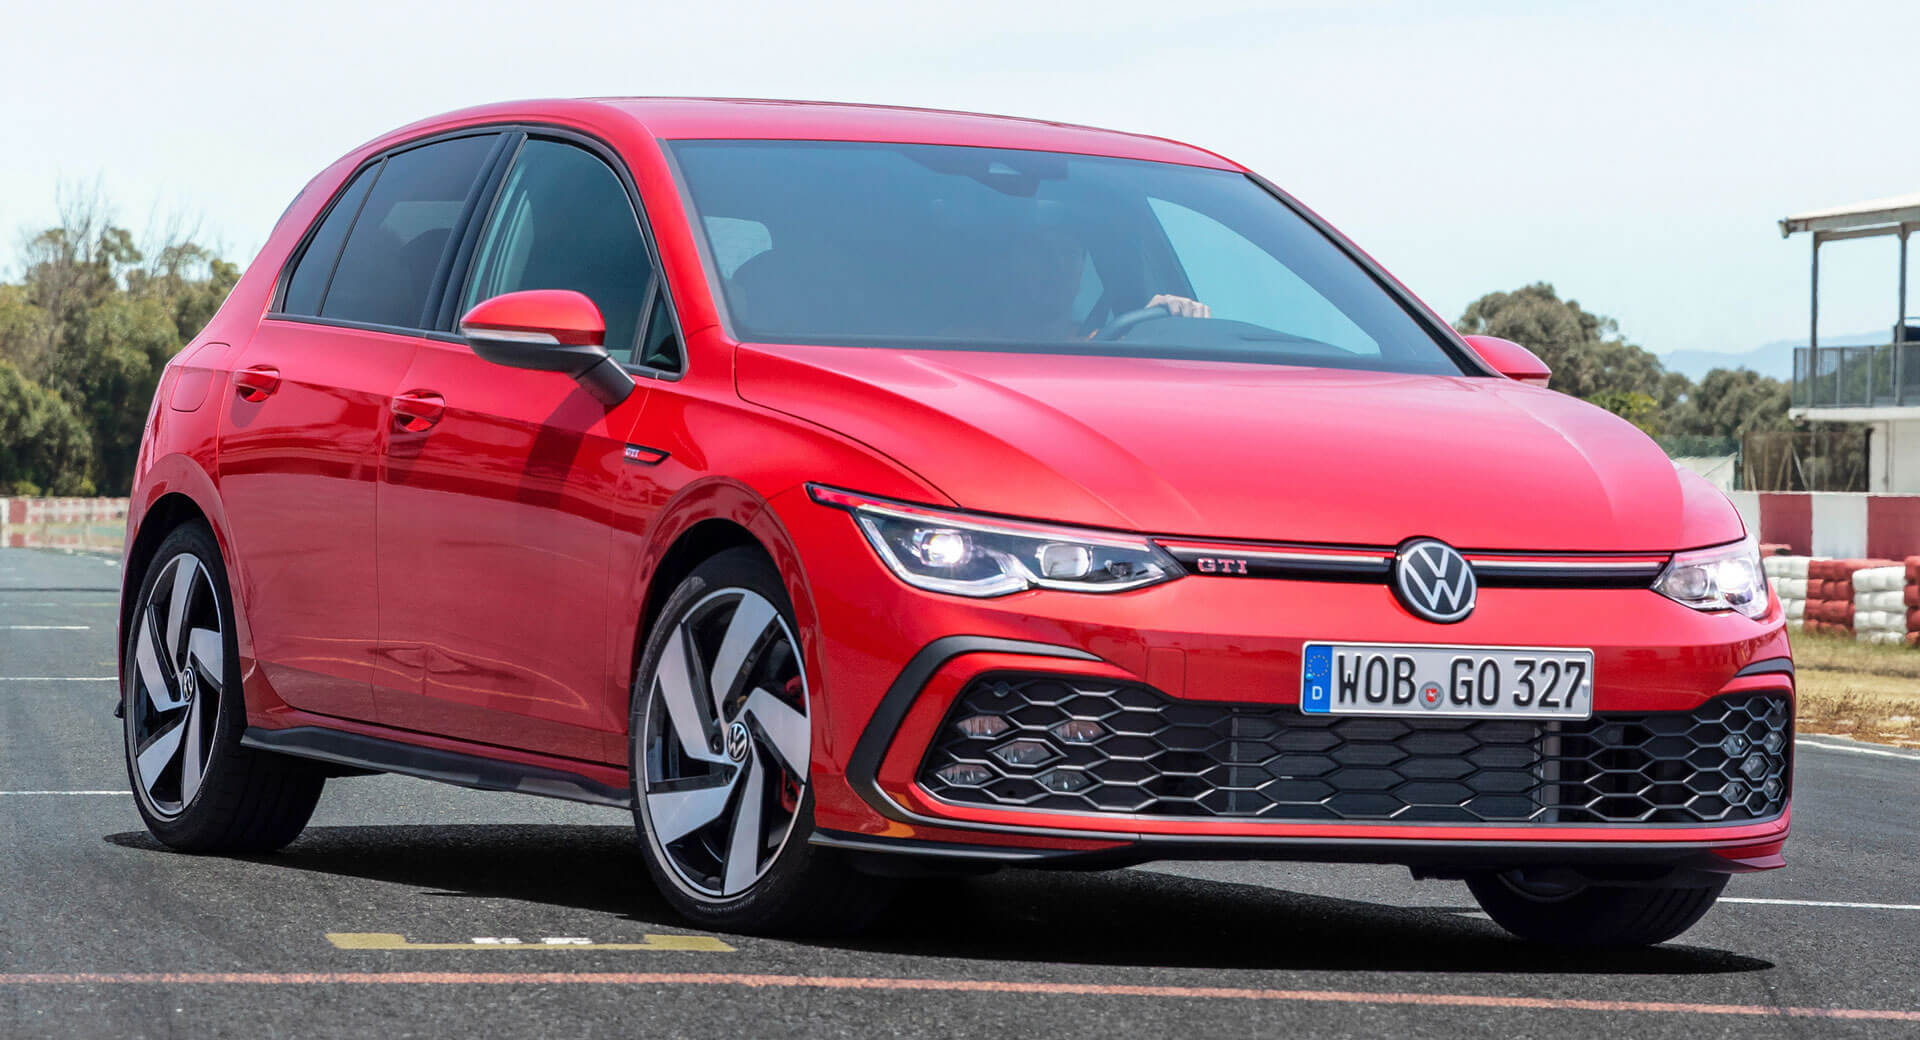 Check Out Every Detail Of The New Vw Golf Gti Mk8 In This Mega Gallery Carscoops